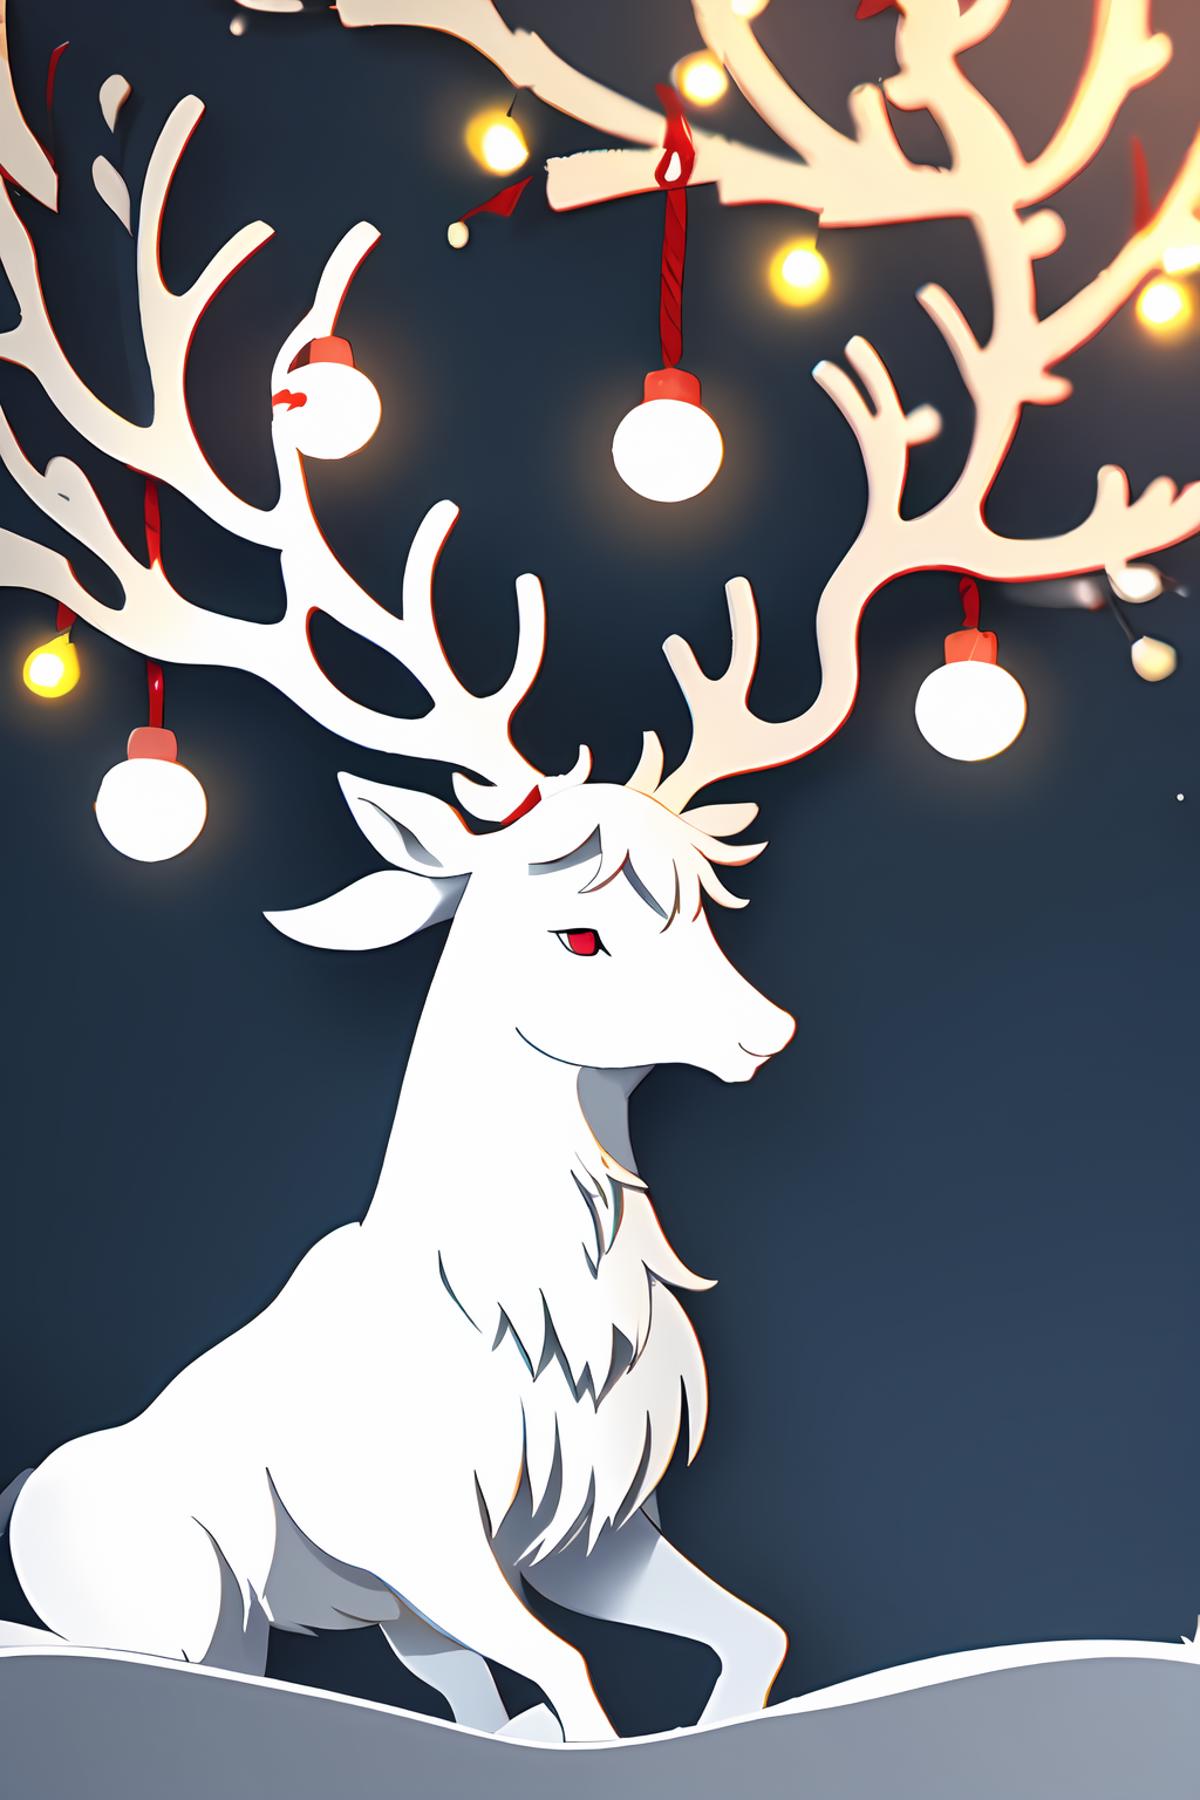 🦌 Reindeers for all your needs 🎄🎅🍎 image by Automaticism